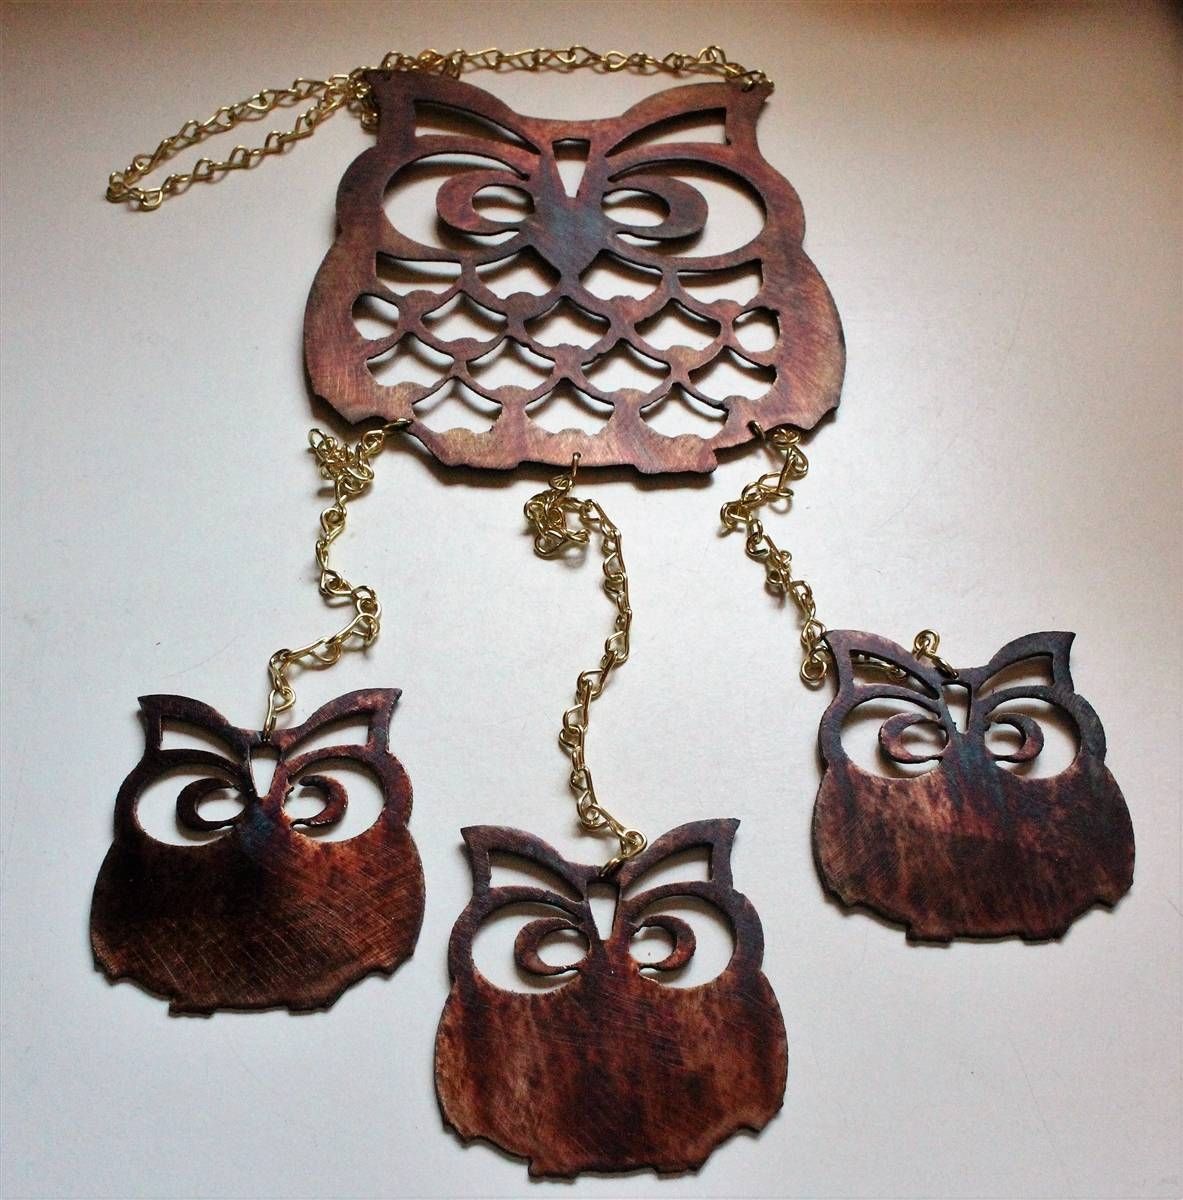 Owlswc 4 In Most Popular Owls Metal Wall Art (View 4 of 20)